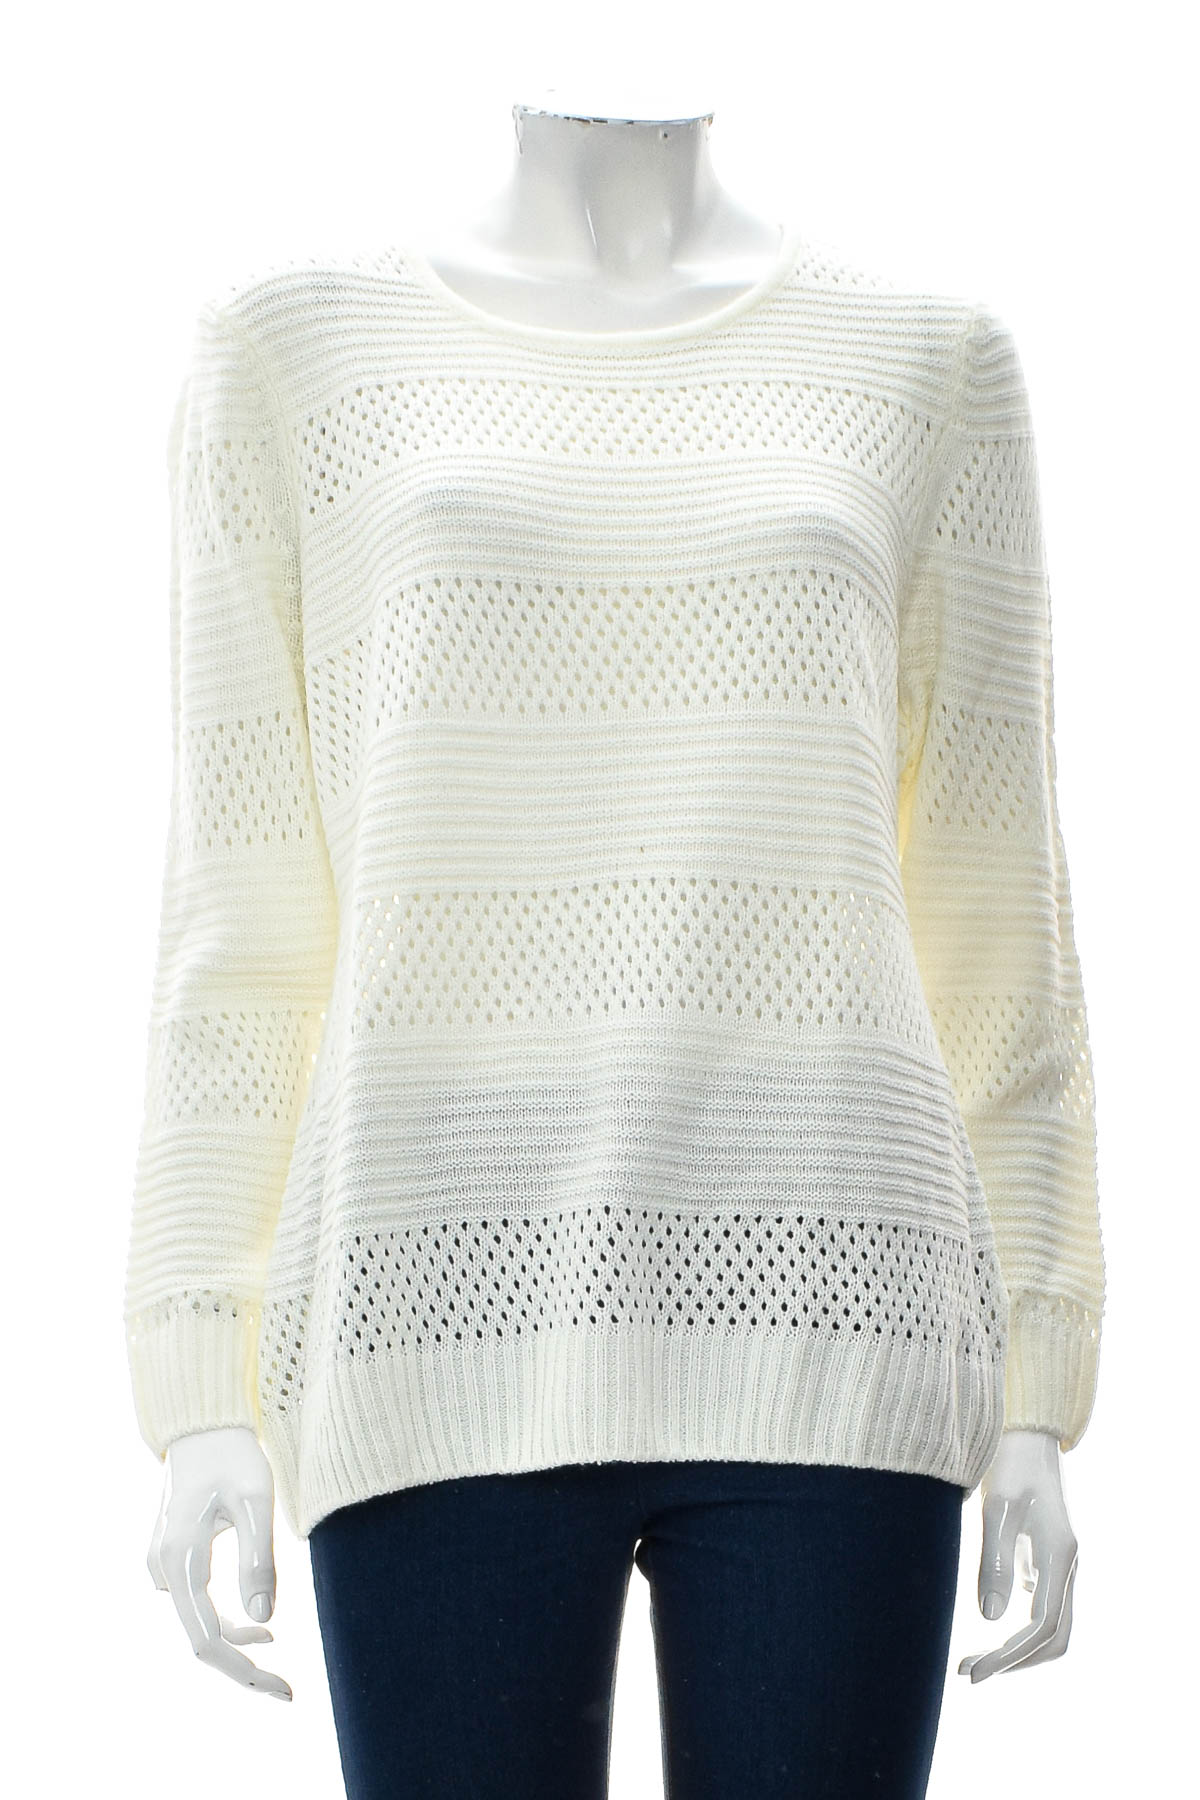 Women's sweater - AproductZ - 0